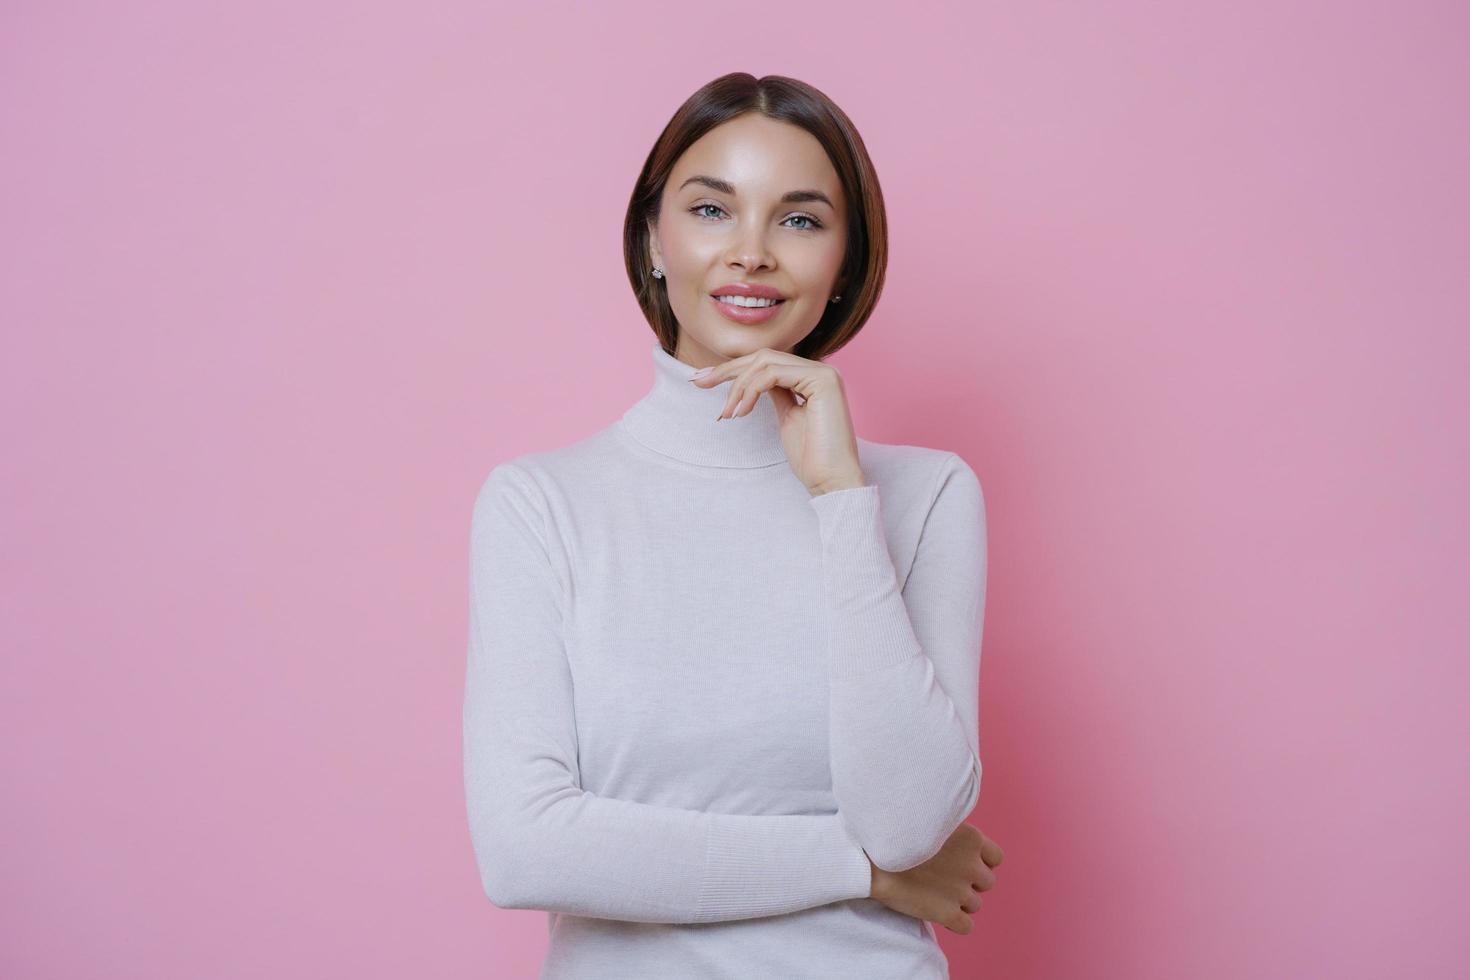 Young beautiful woman with pleased expression, touches chin, smiles tenderly, has straight dark hair, dressed in casual white turtleneck, isolated on pink background. Femininity, beauty and skin care photo